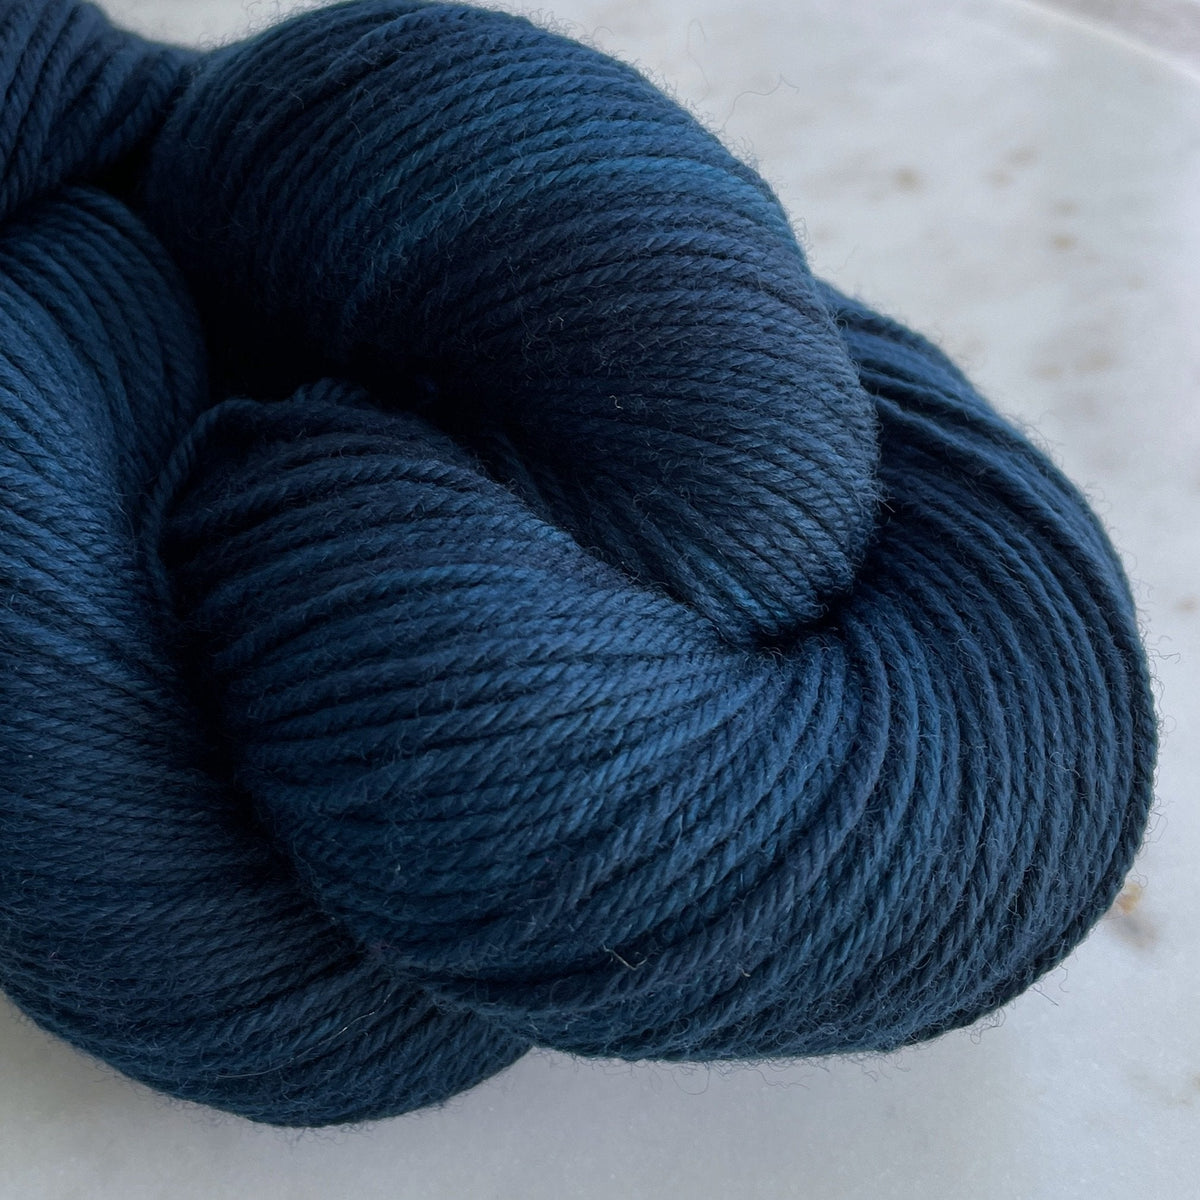 Dyed To Order: Ross Poldark